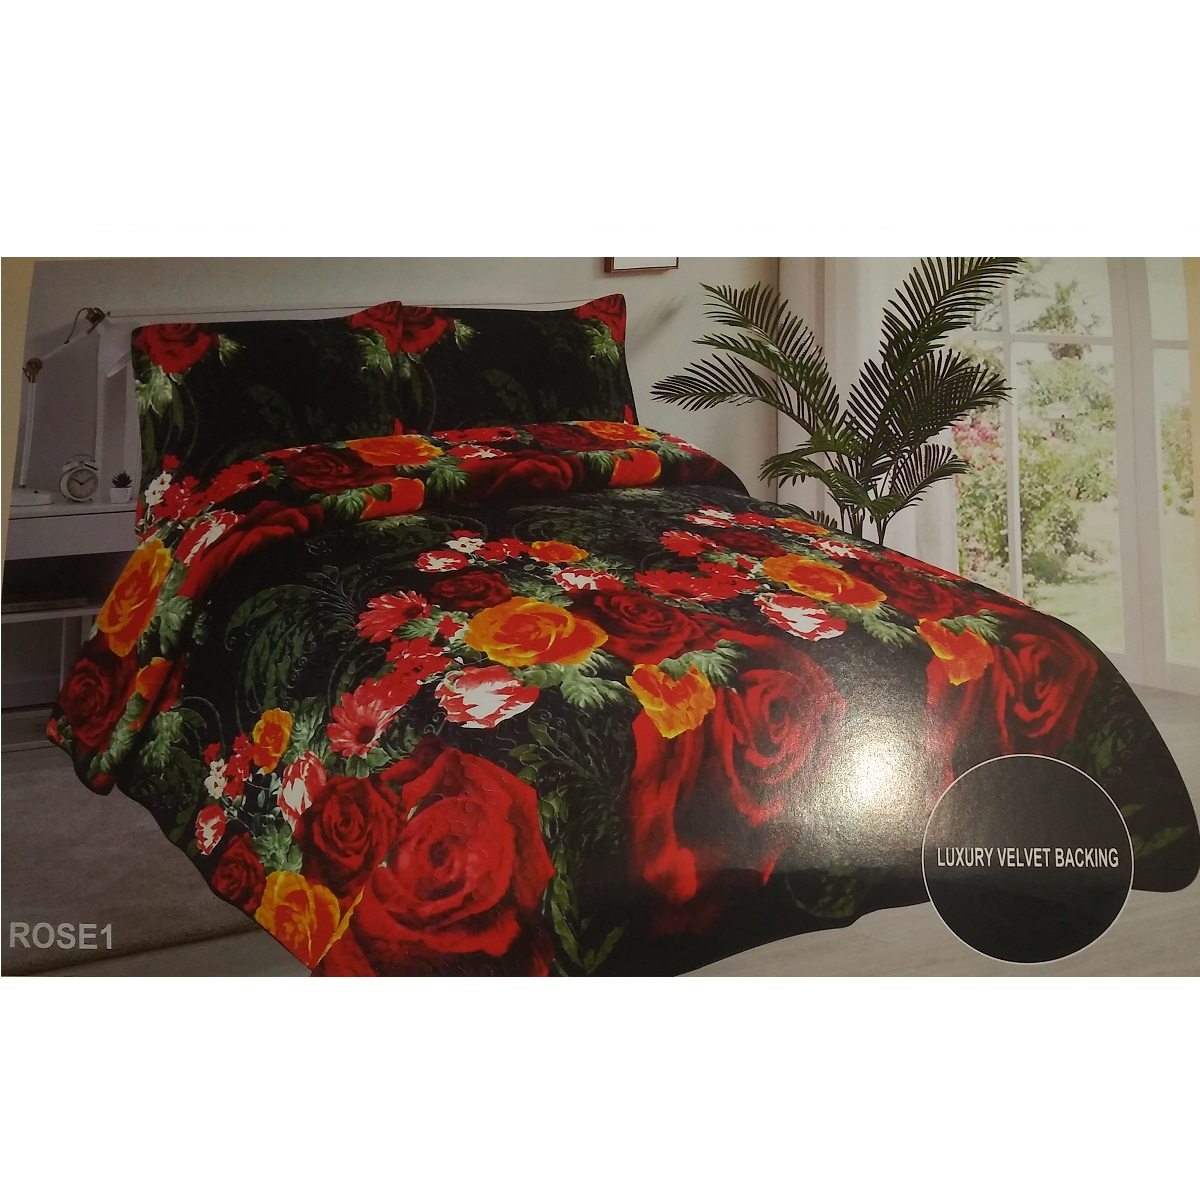 Roses Design 3 Piece Quilted Bedspread Set,Multicolor Roses,